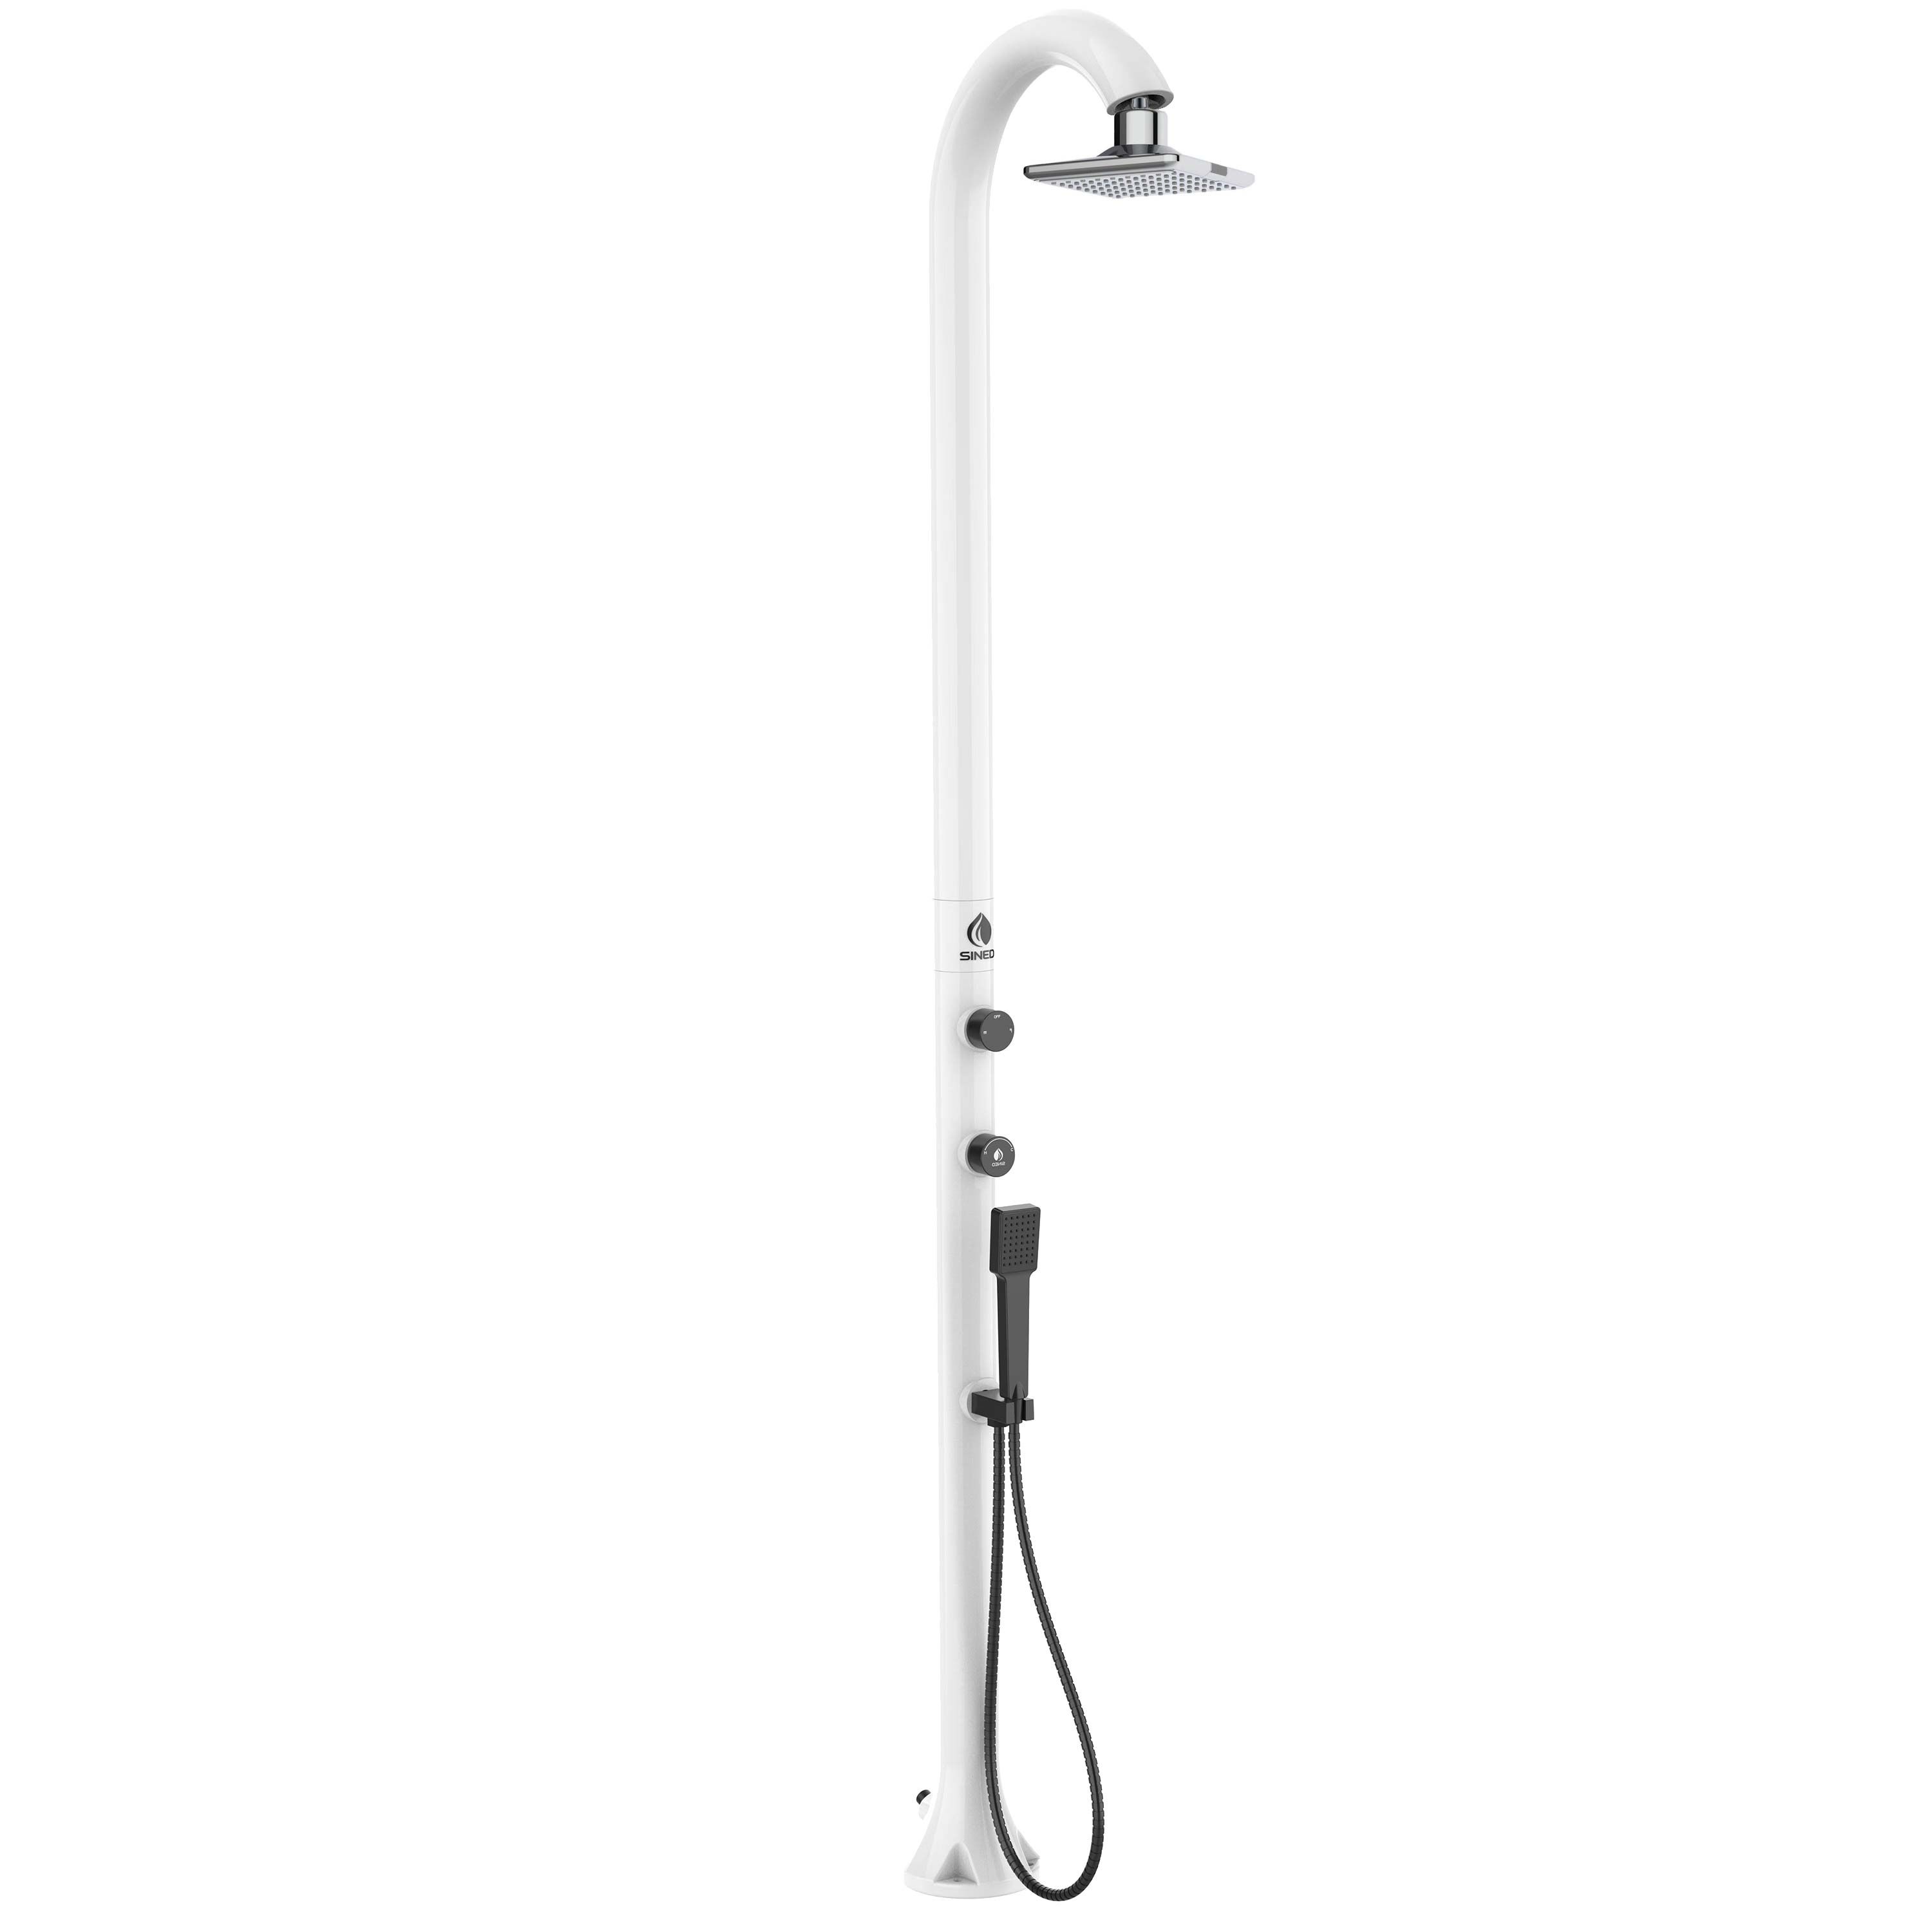 Douche exterieure douche double iswitch sined luna white